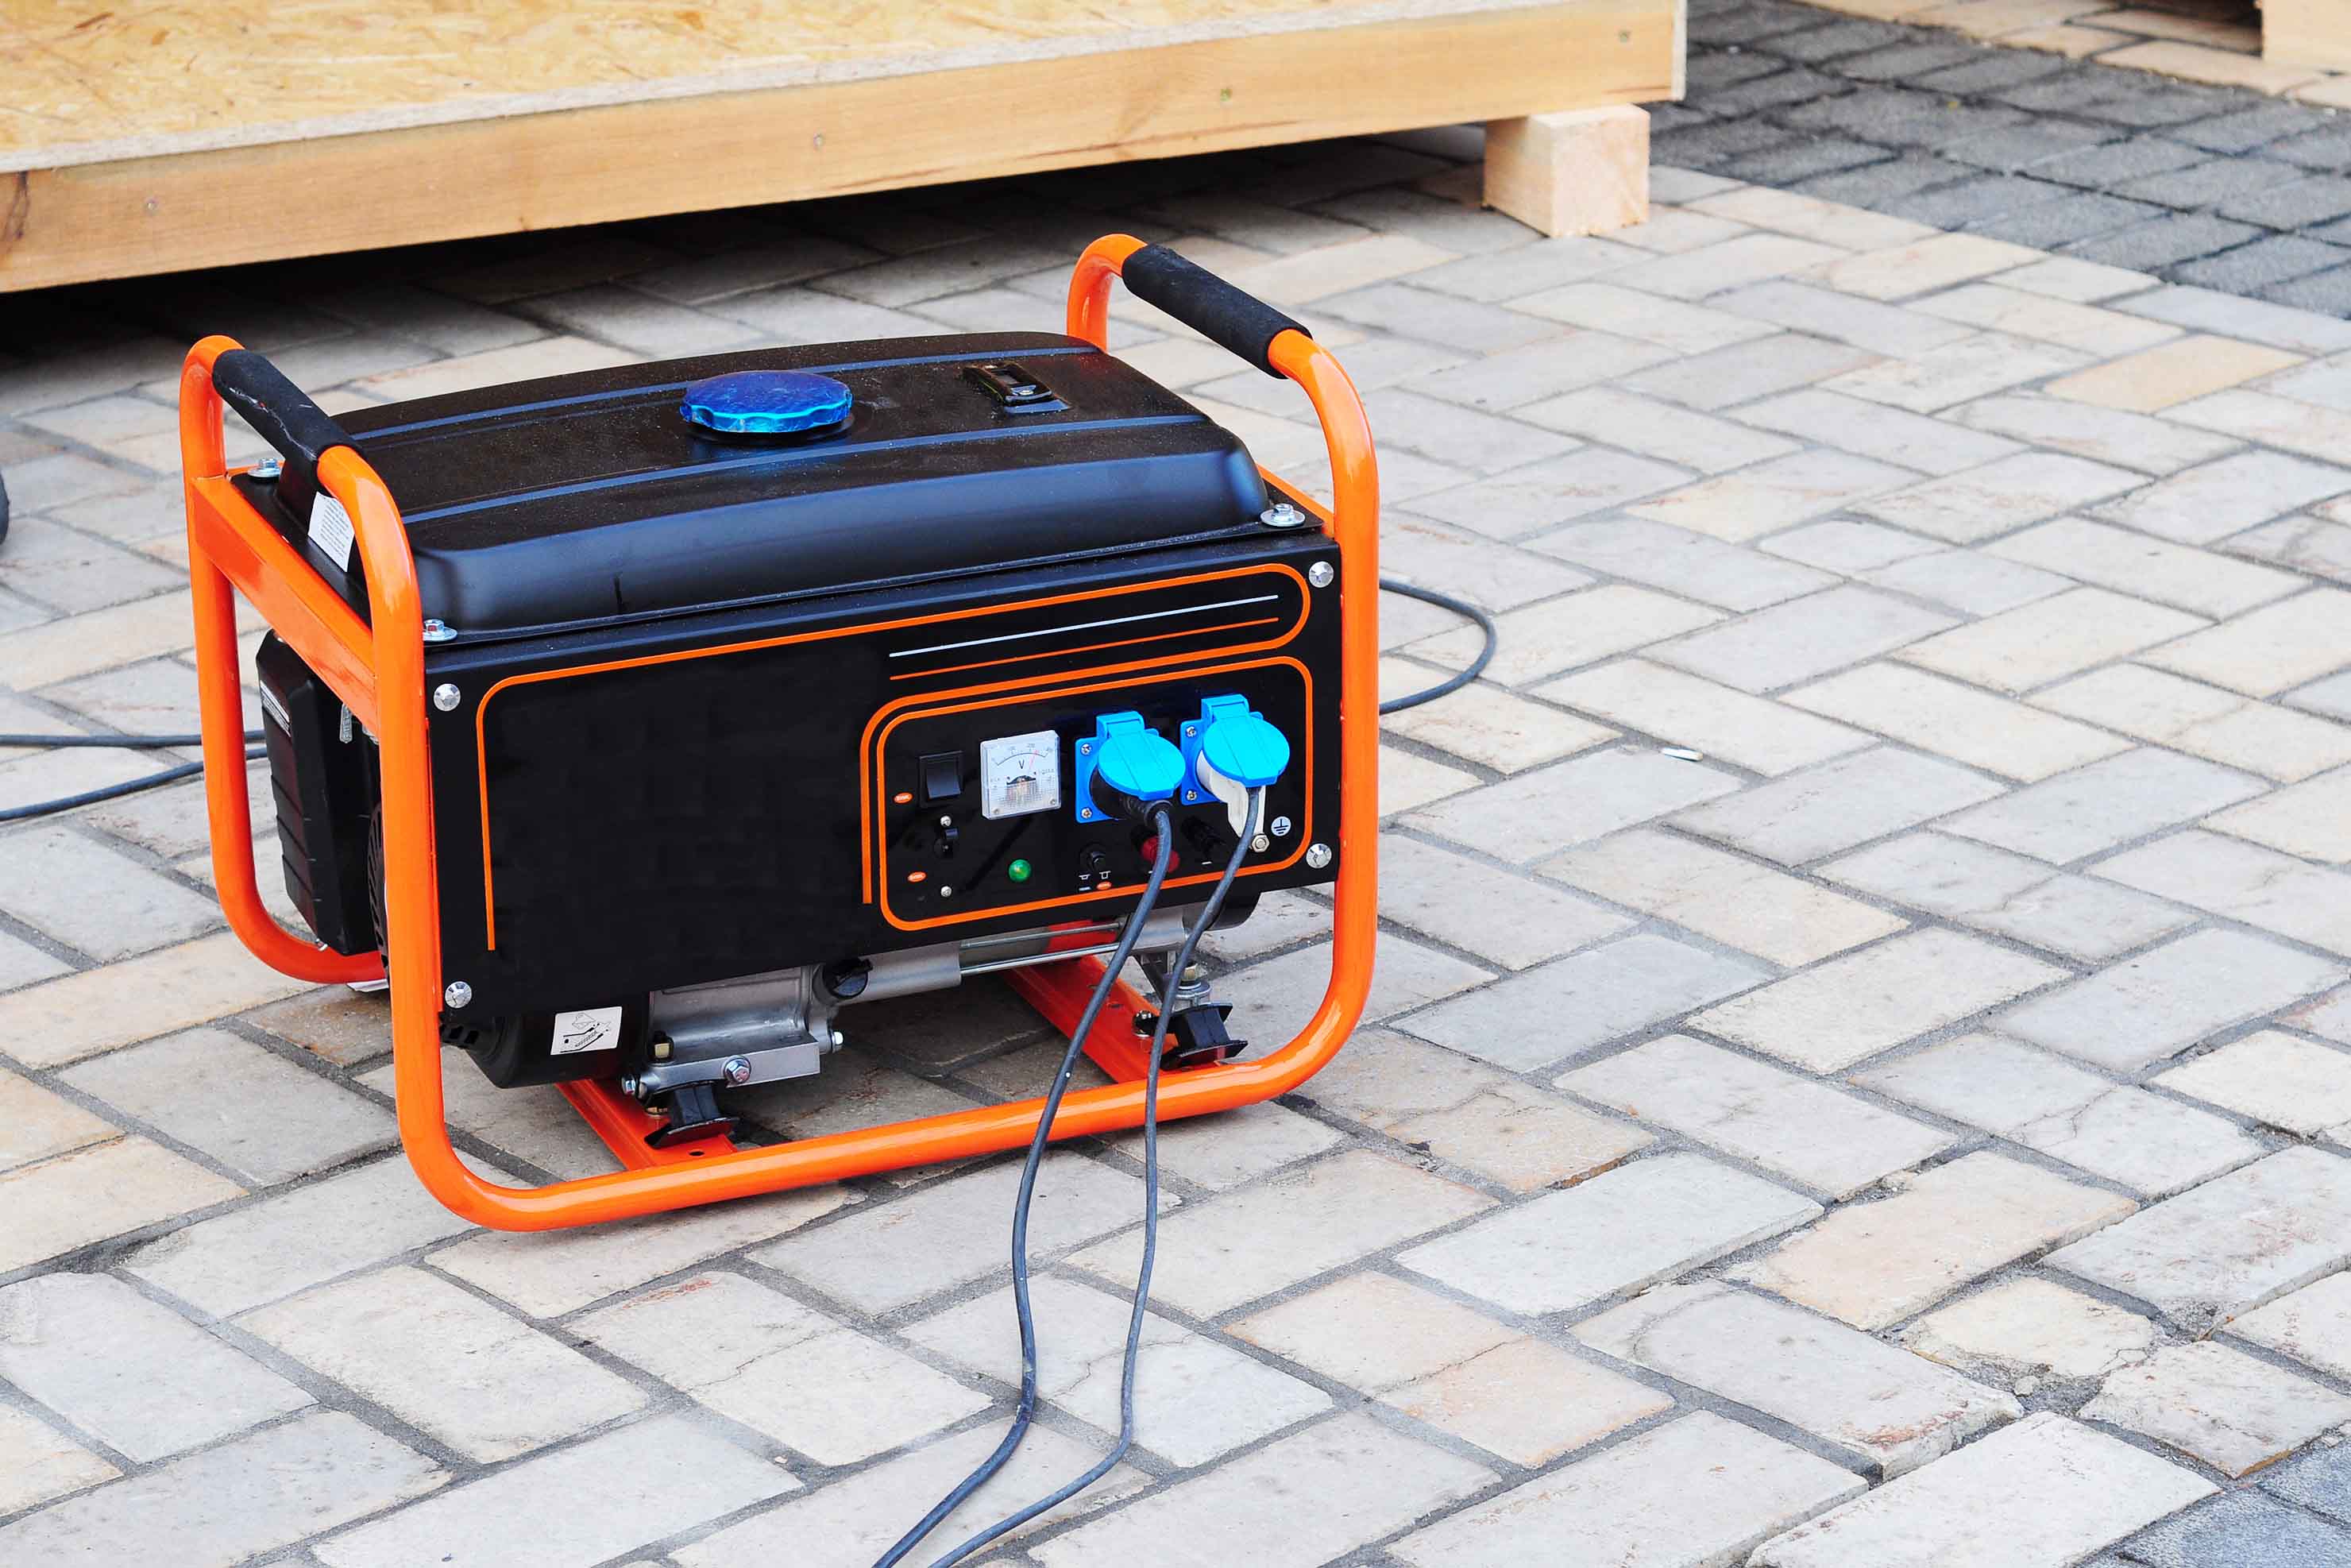 What Are Generators Used For?